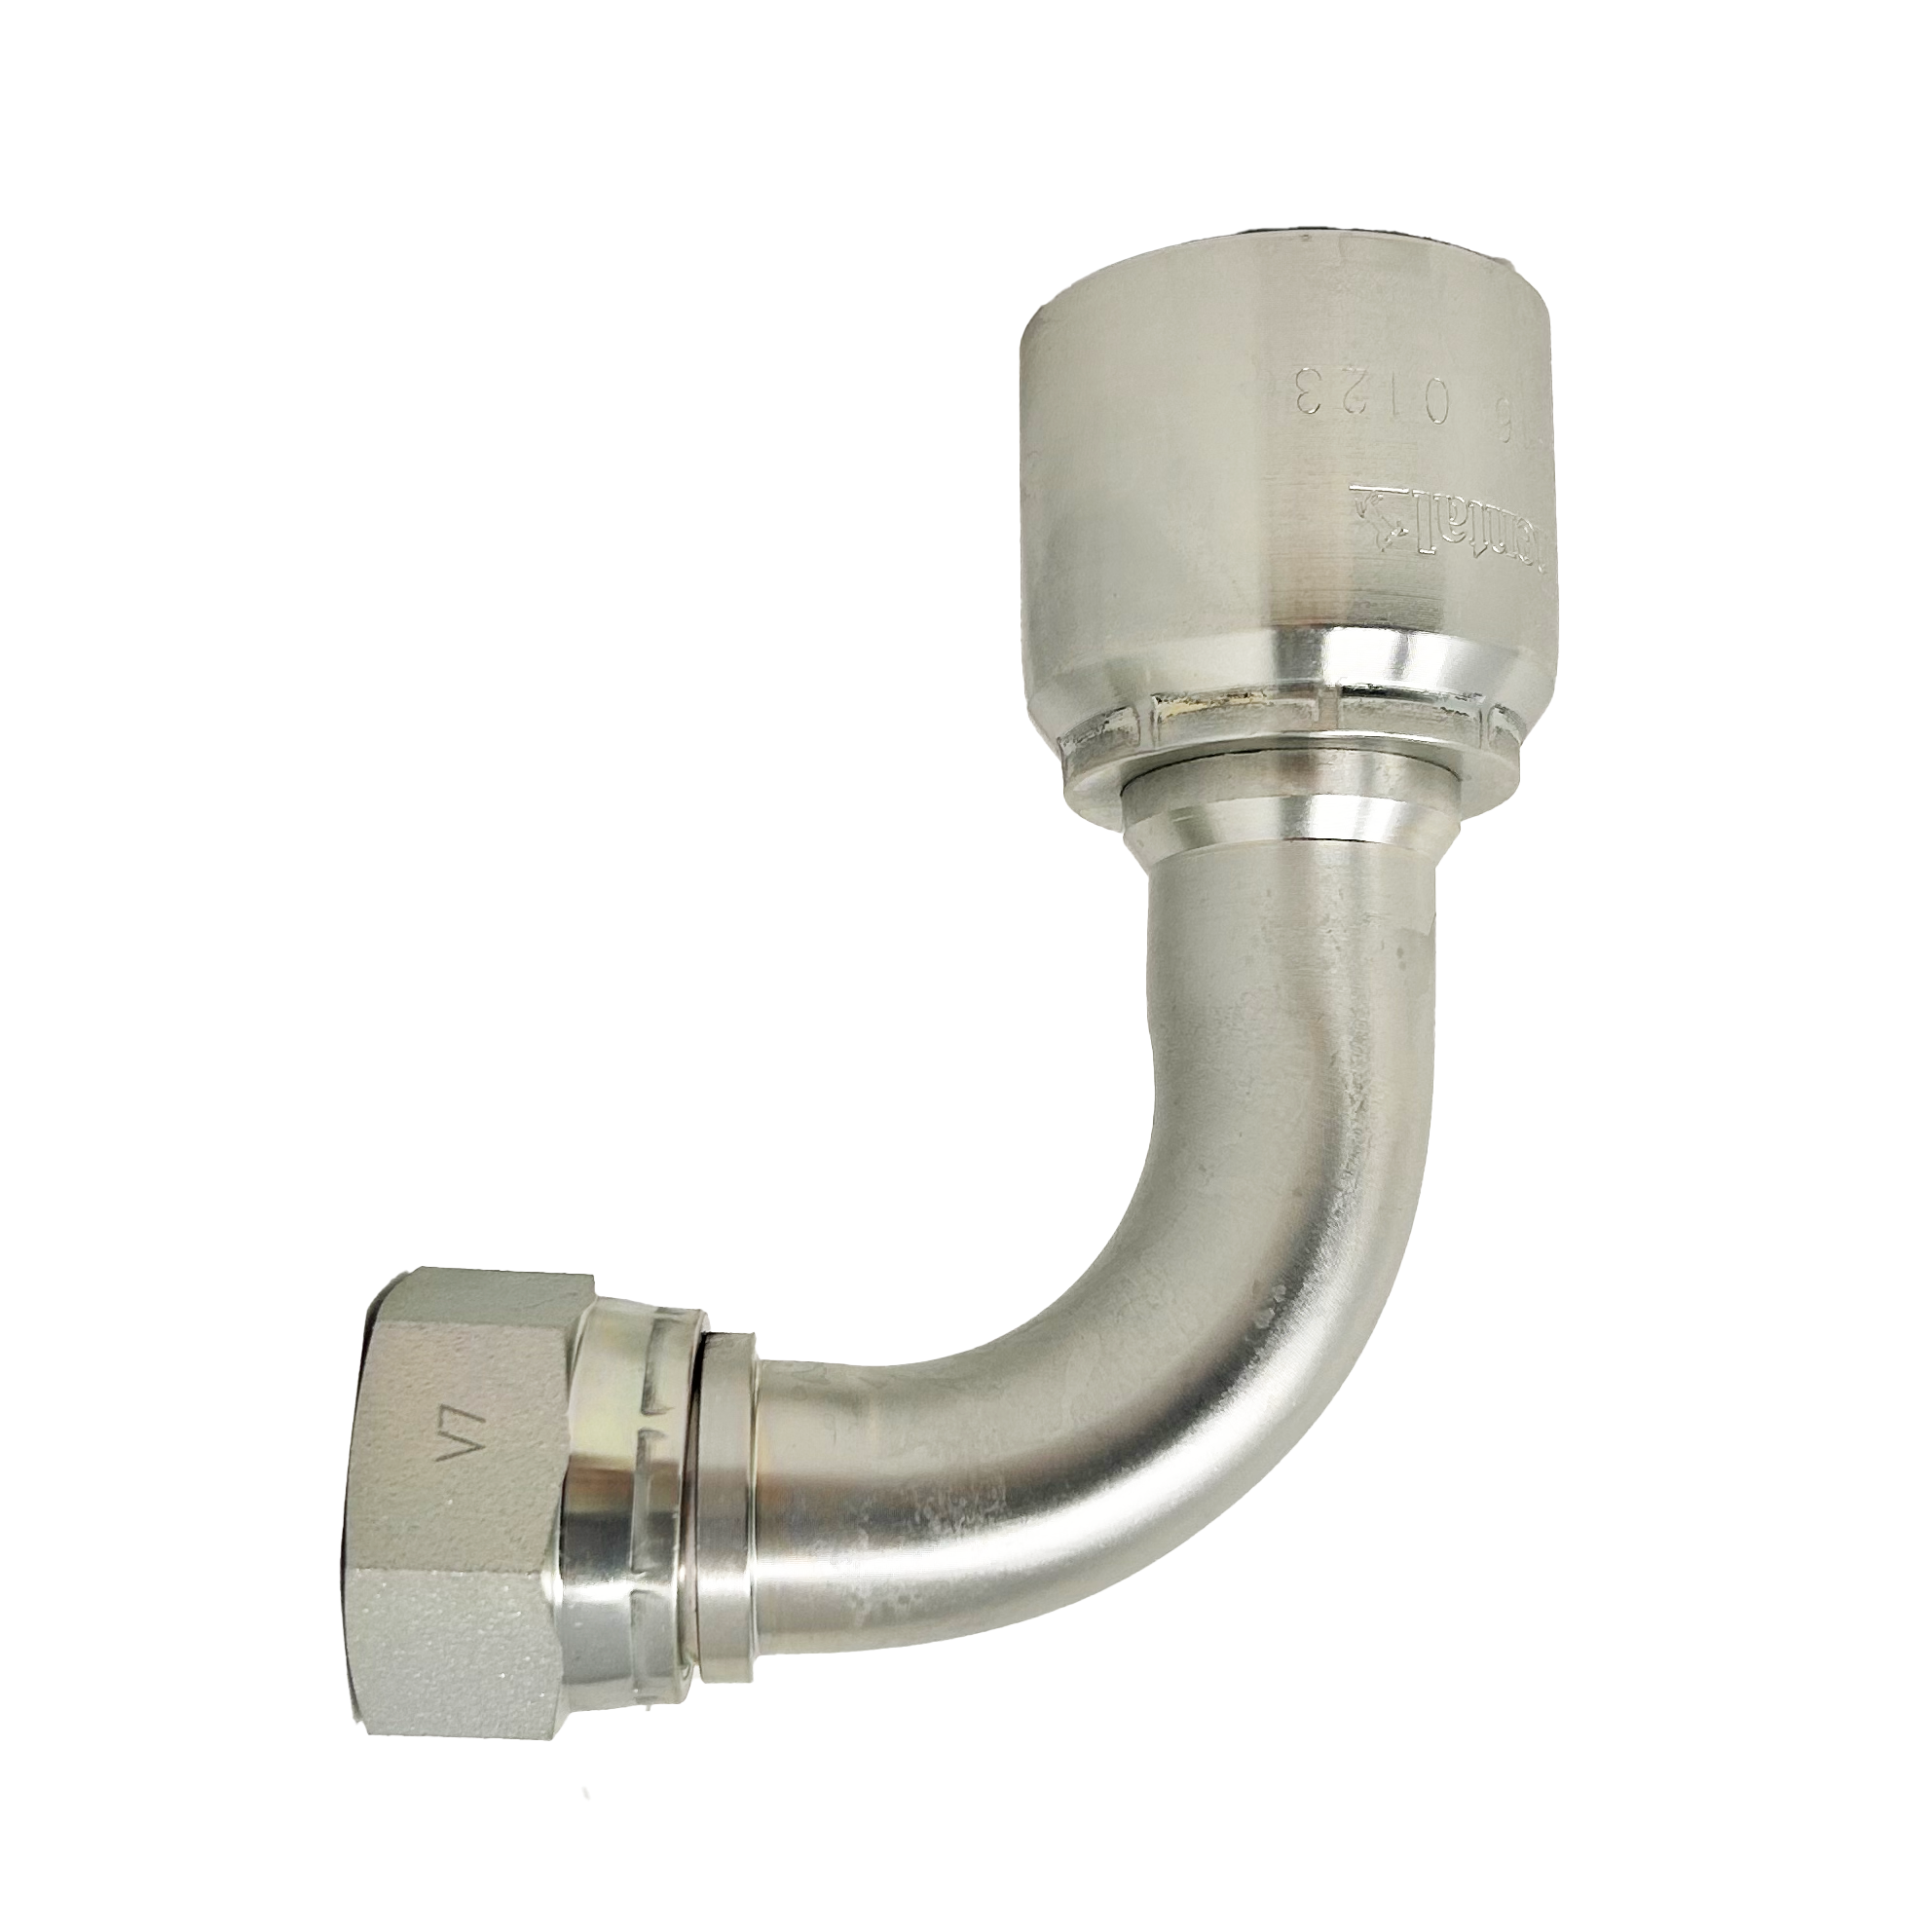 B2-JCFX90-1012: Continental Hose Fitting, 0.625 (5/8") Hose ID x 1-1/16-12 Female JIC, 90-Degree Swivel Connection